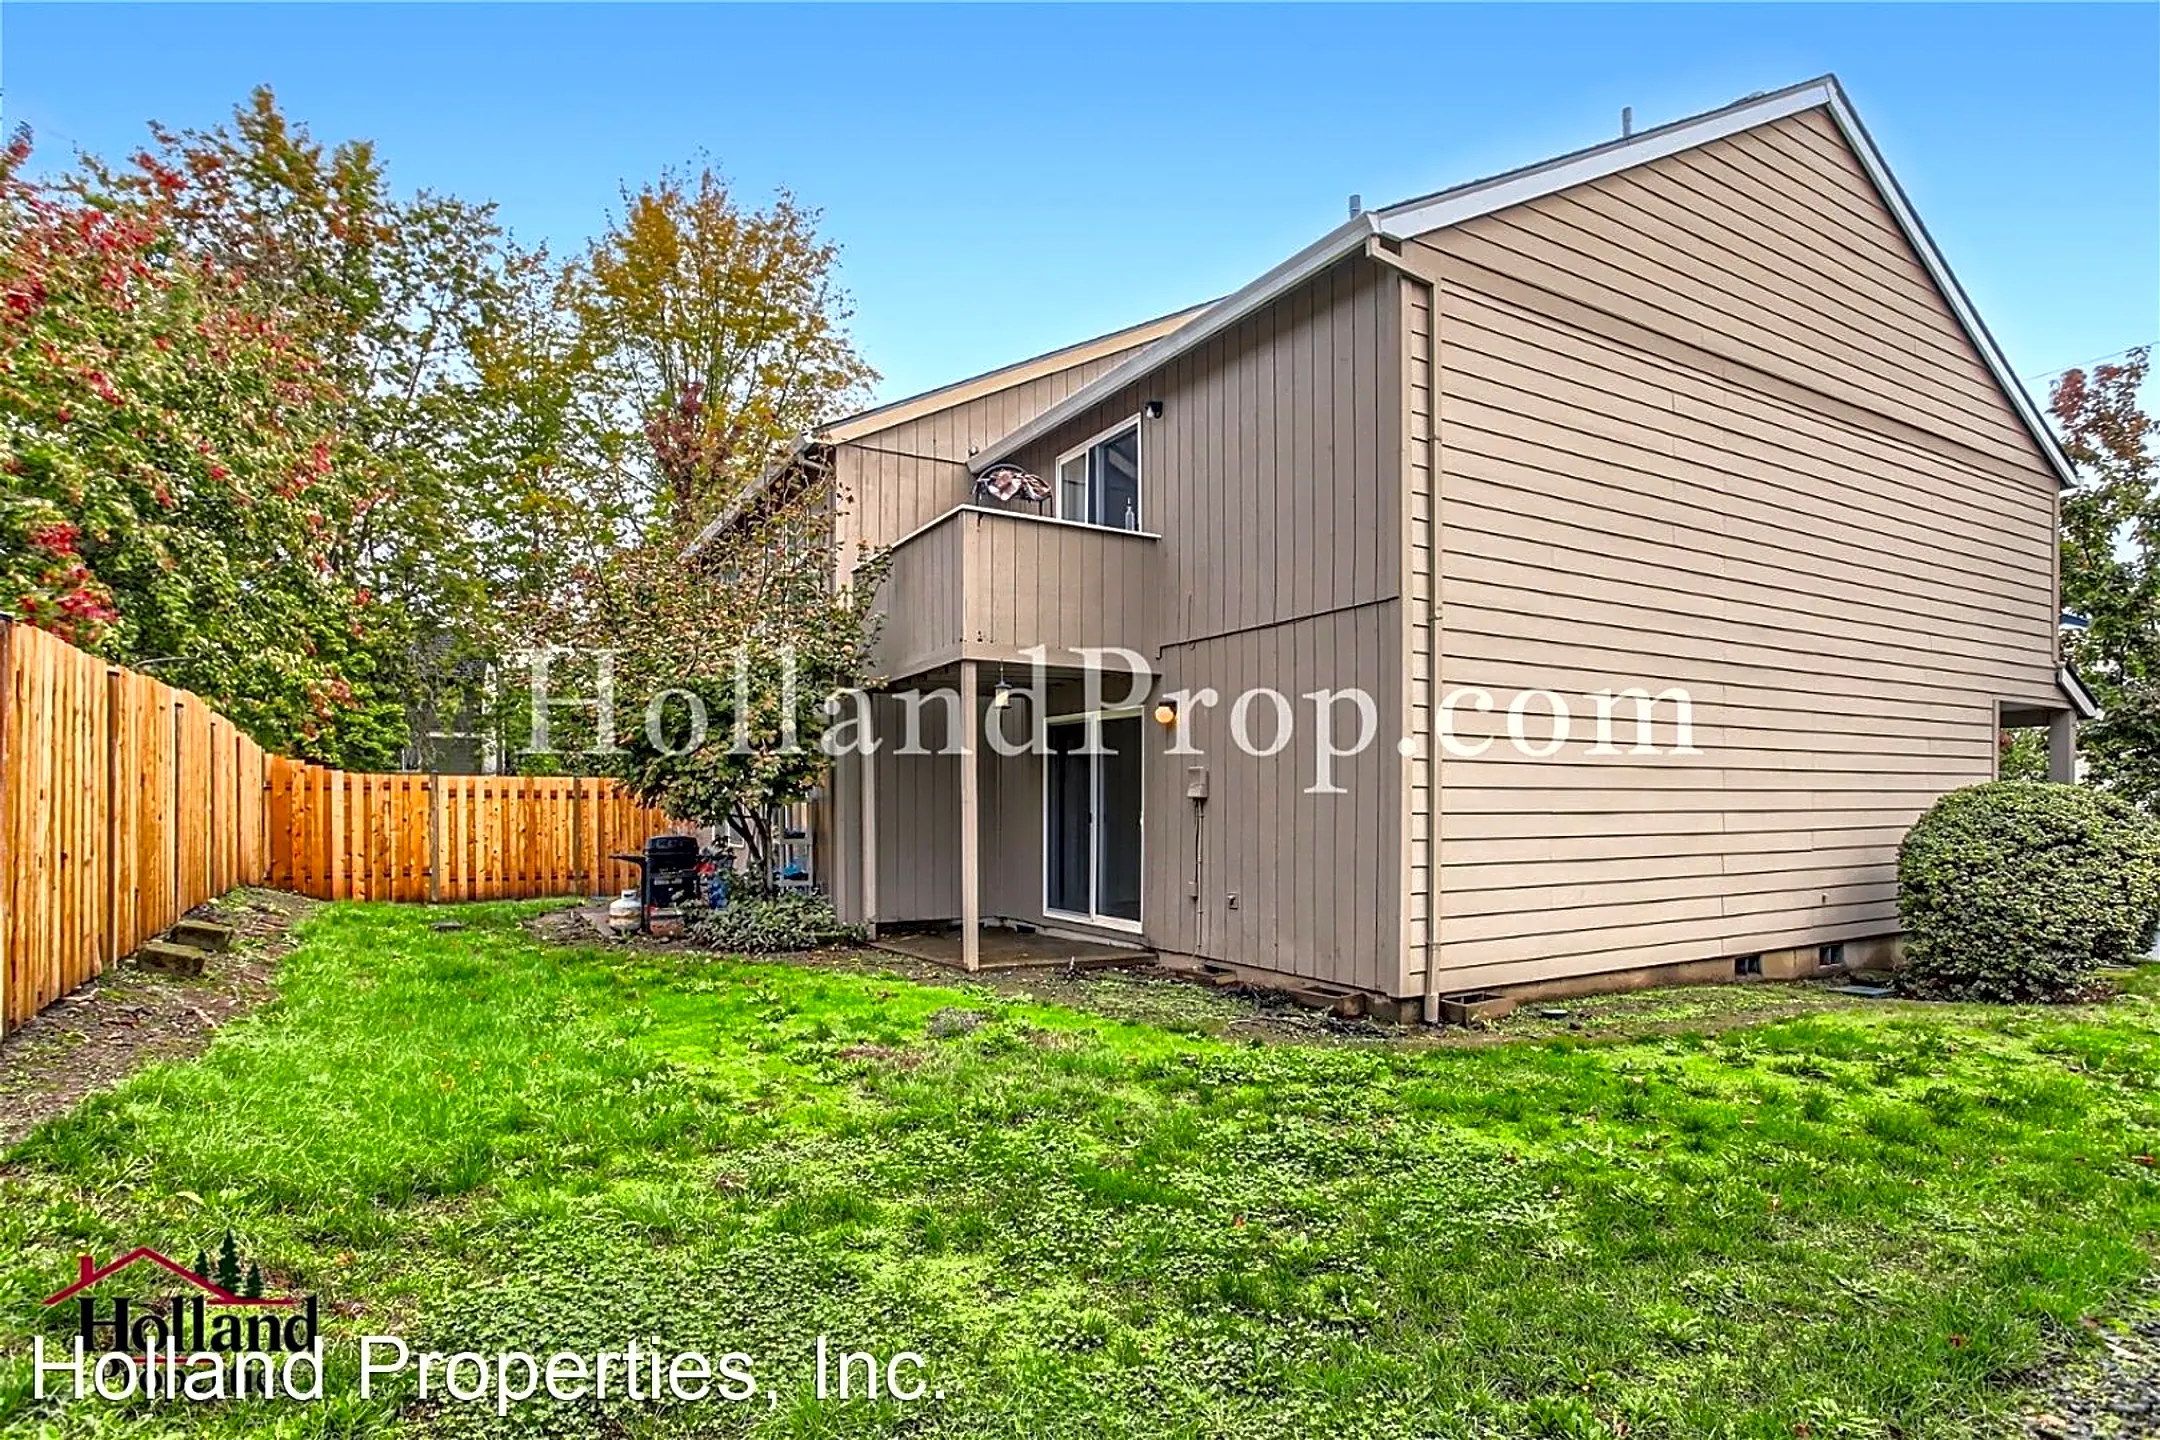 Building - 4223 SW 159th Ave - Beaverton, OR